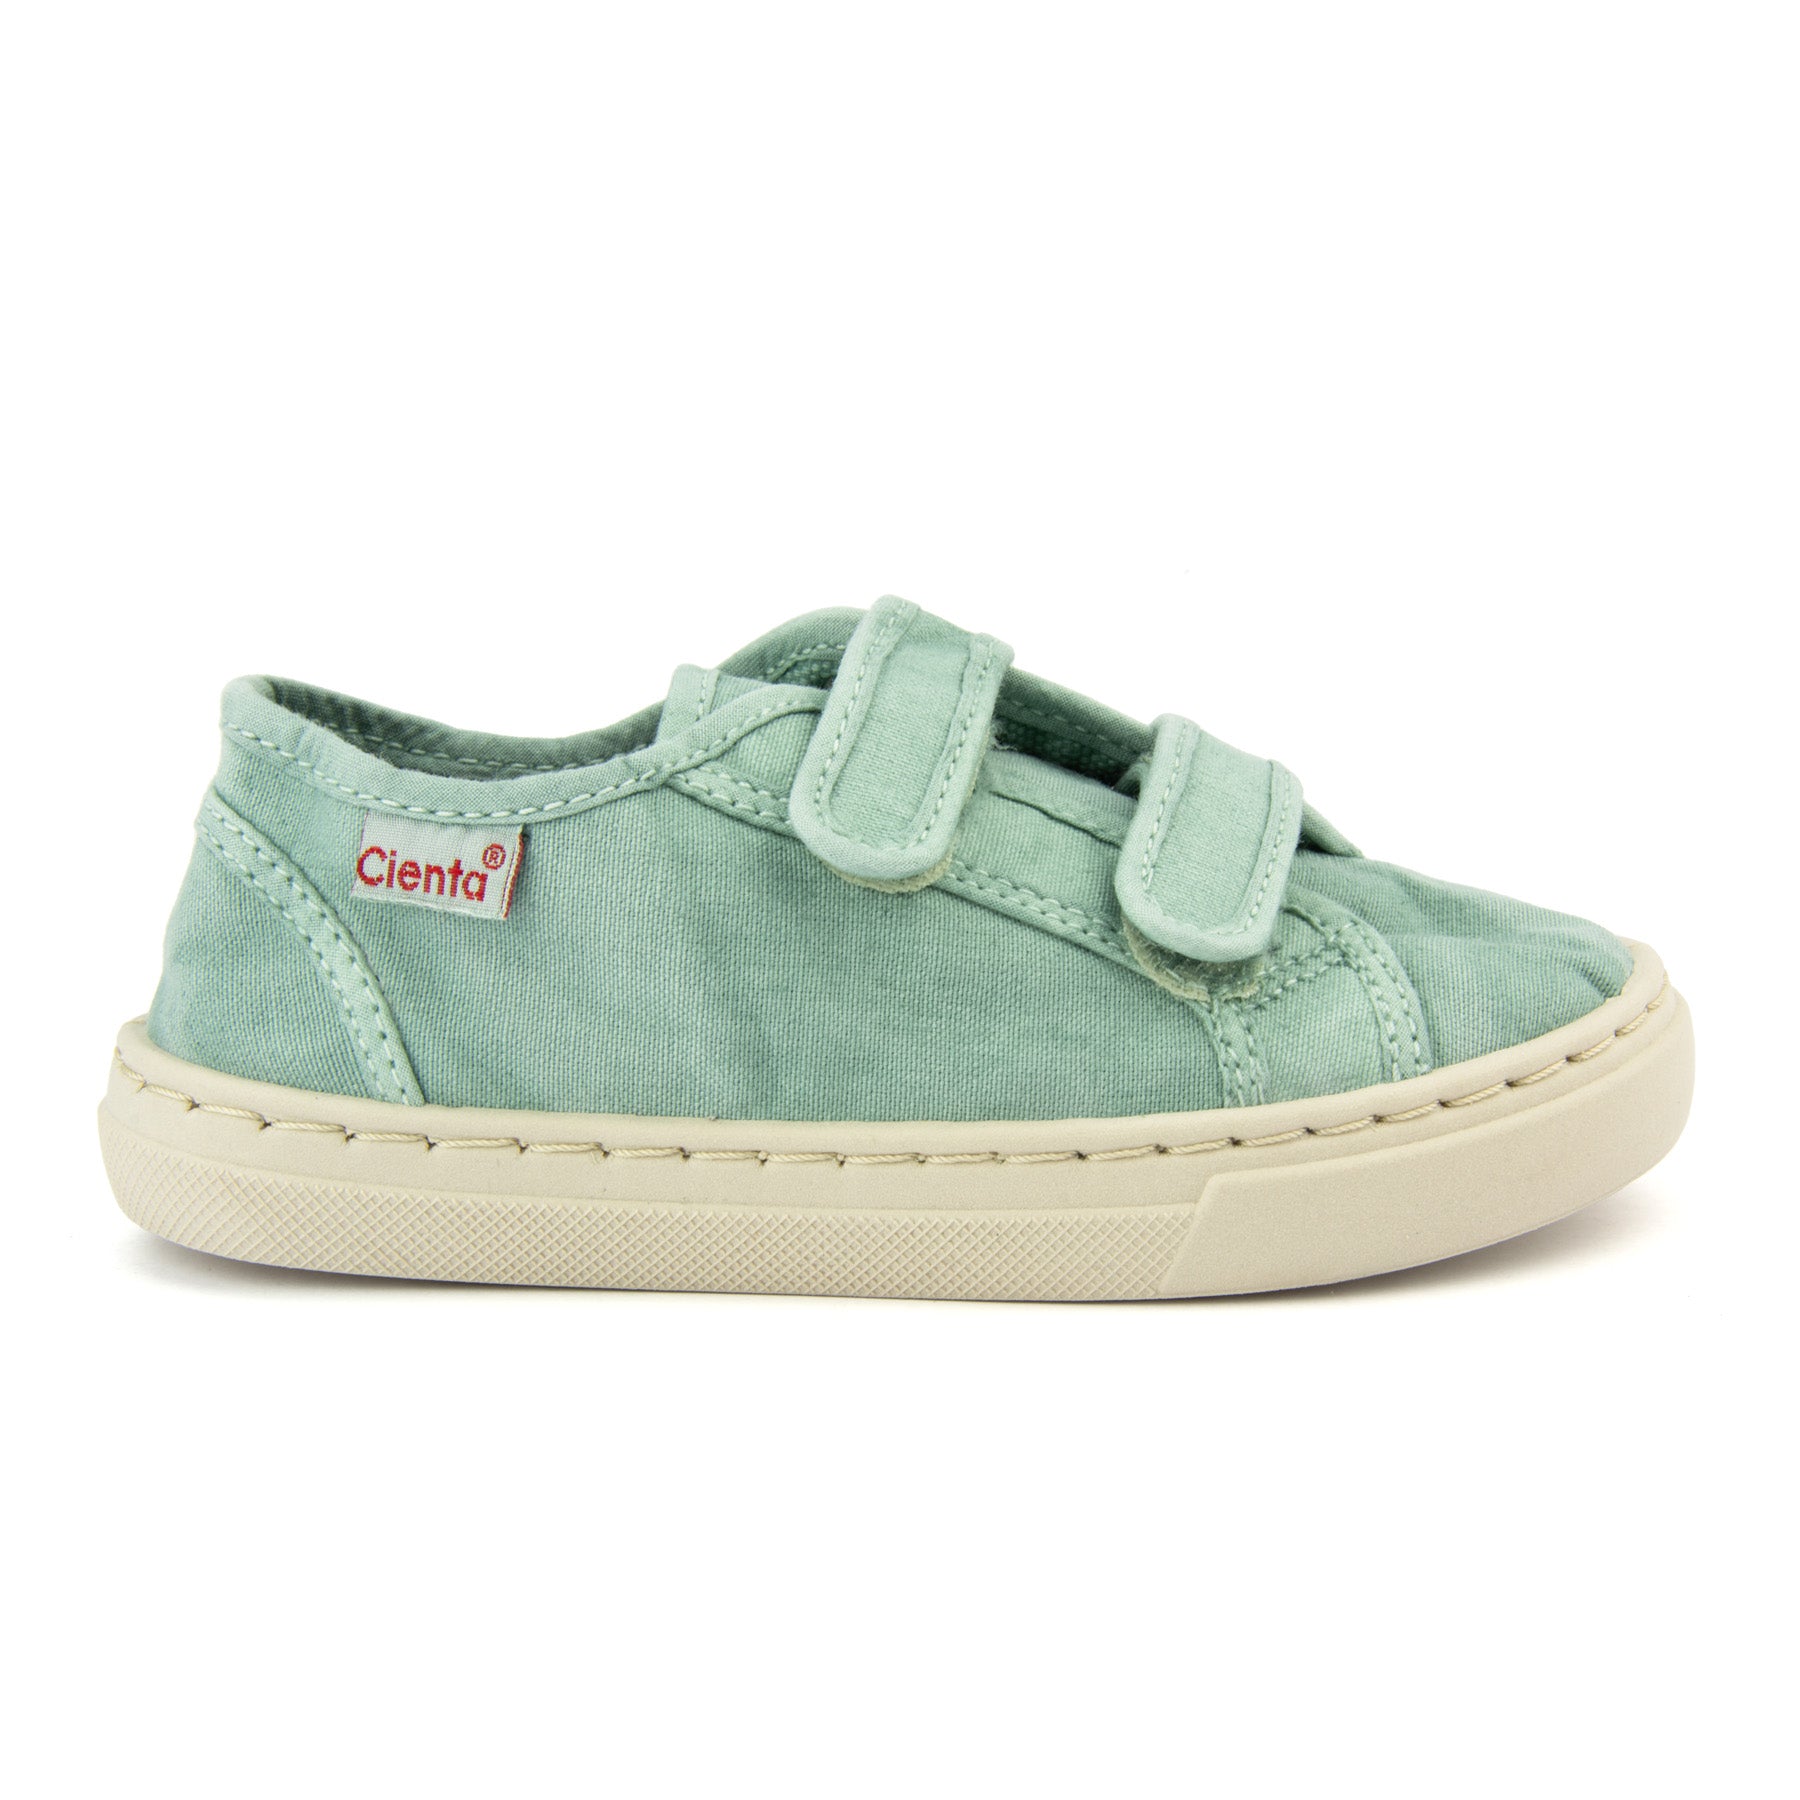 Cienta Shoes From Child Sneakers Cloth Slip On For Kids Boys Scented 37 |  eBay